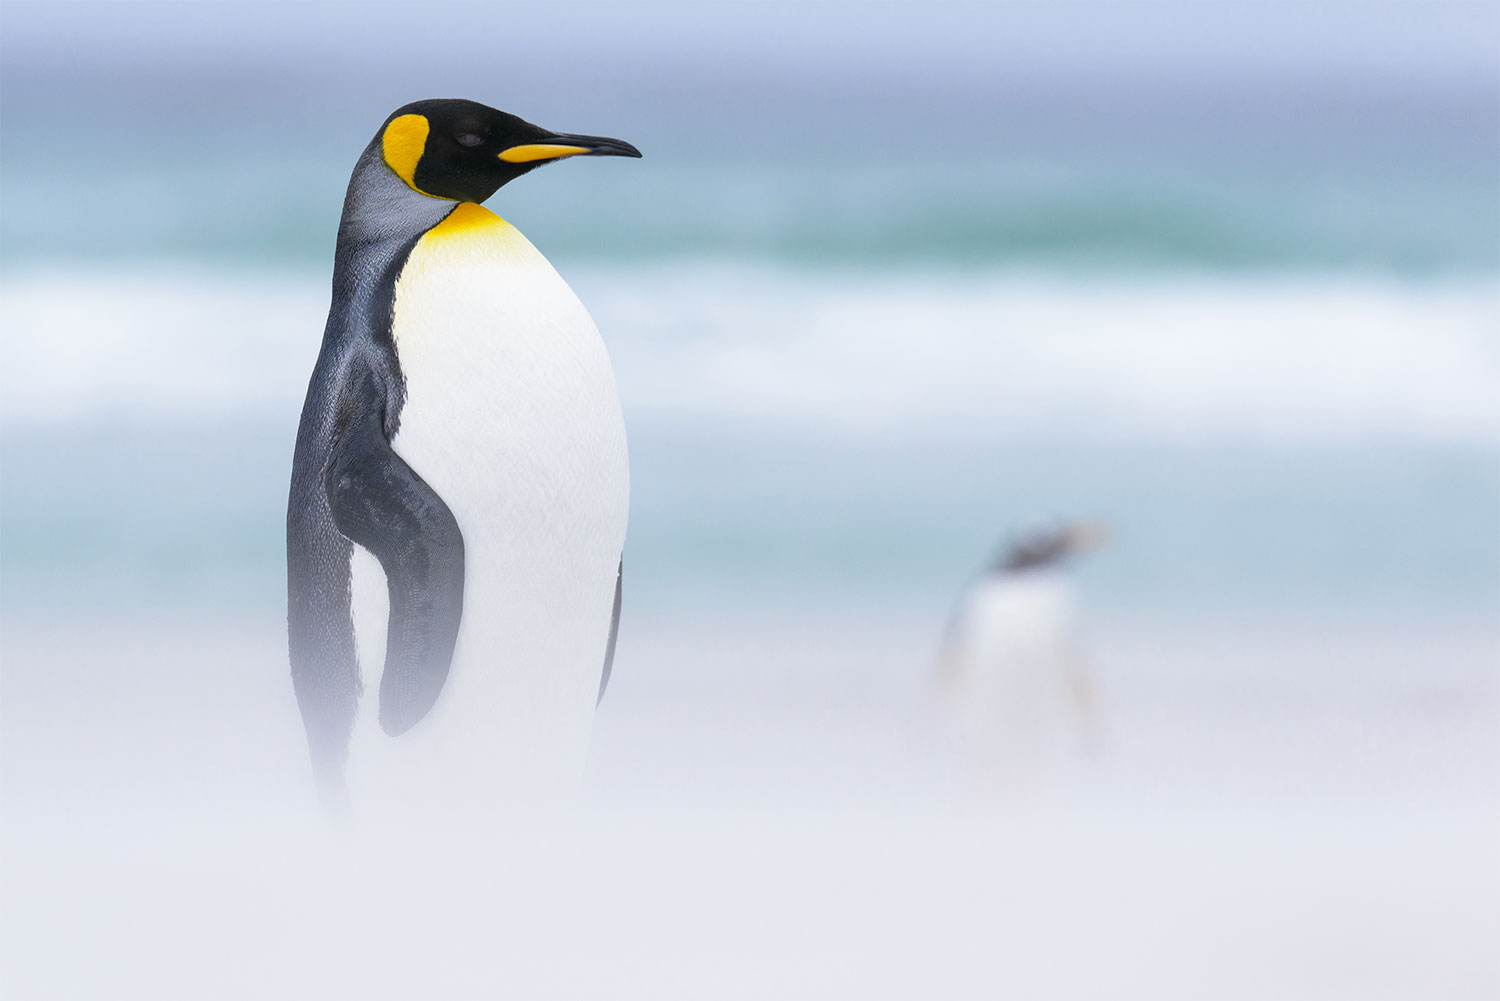 By Shem Compion | Wild Shots Cape Town 2015